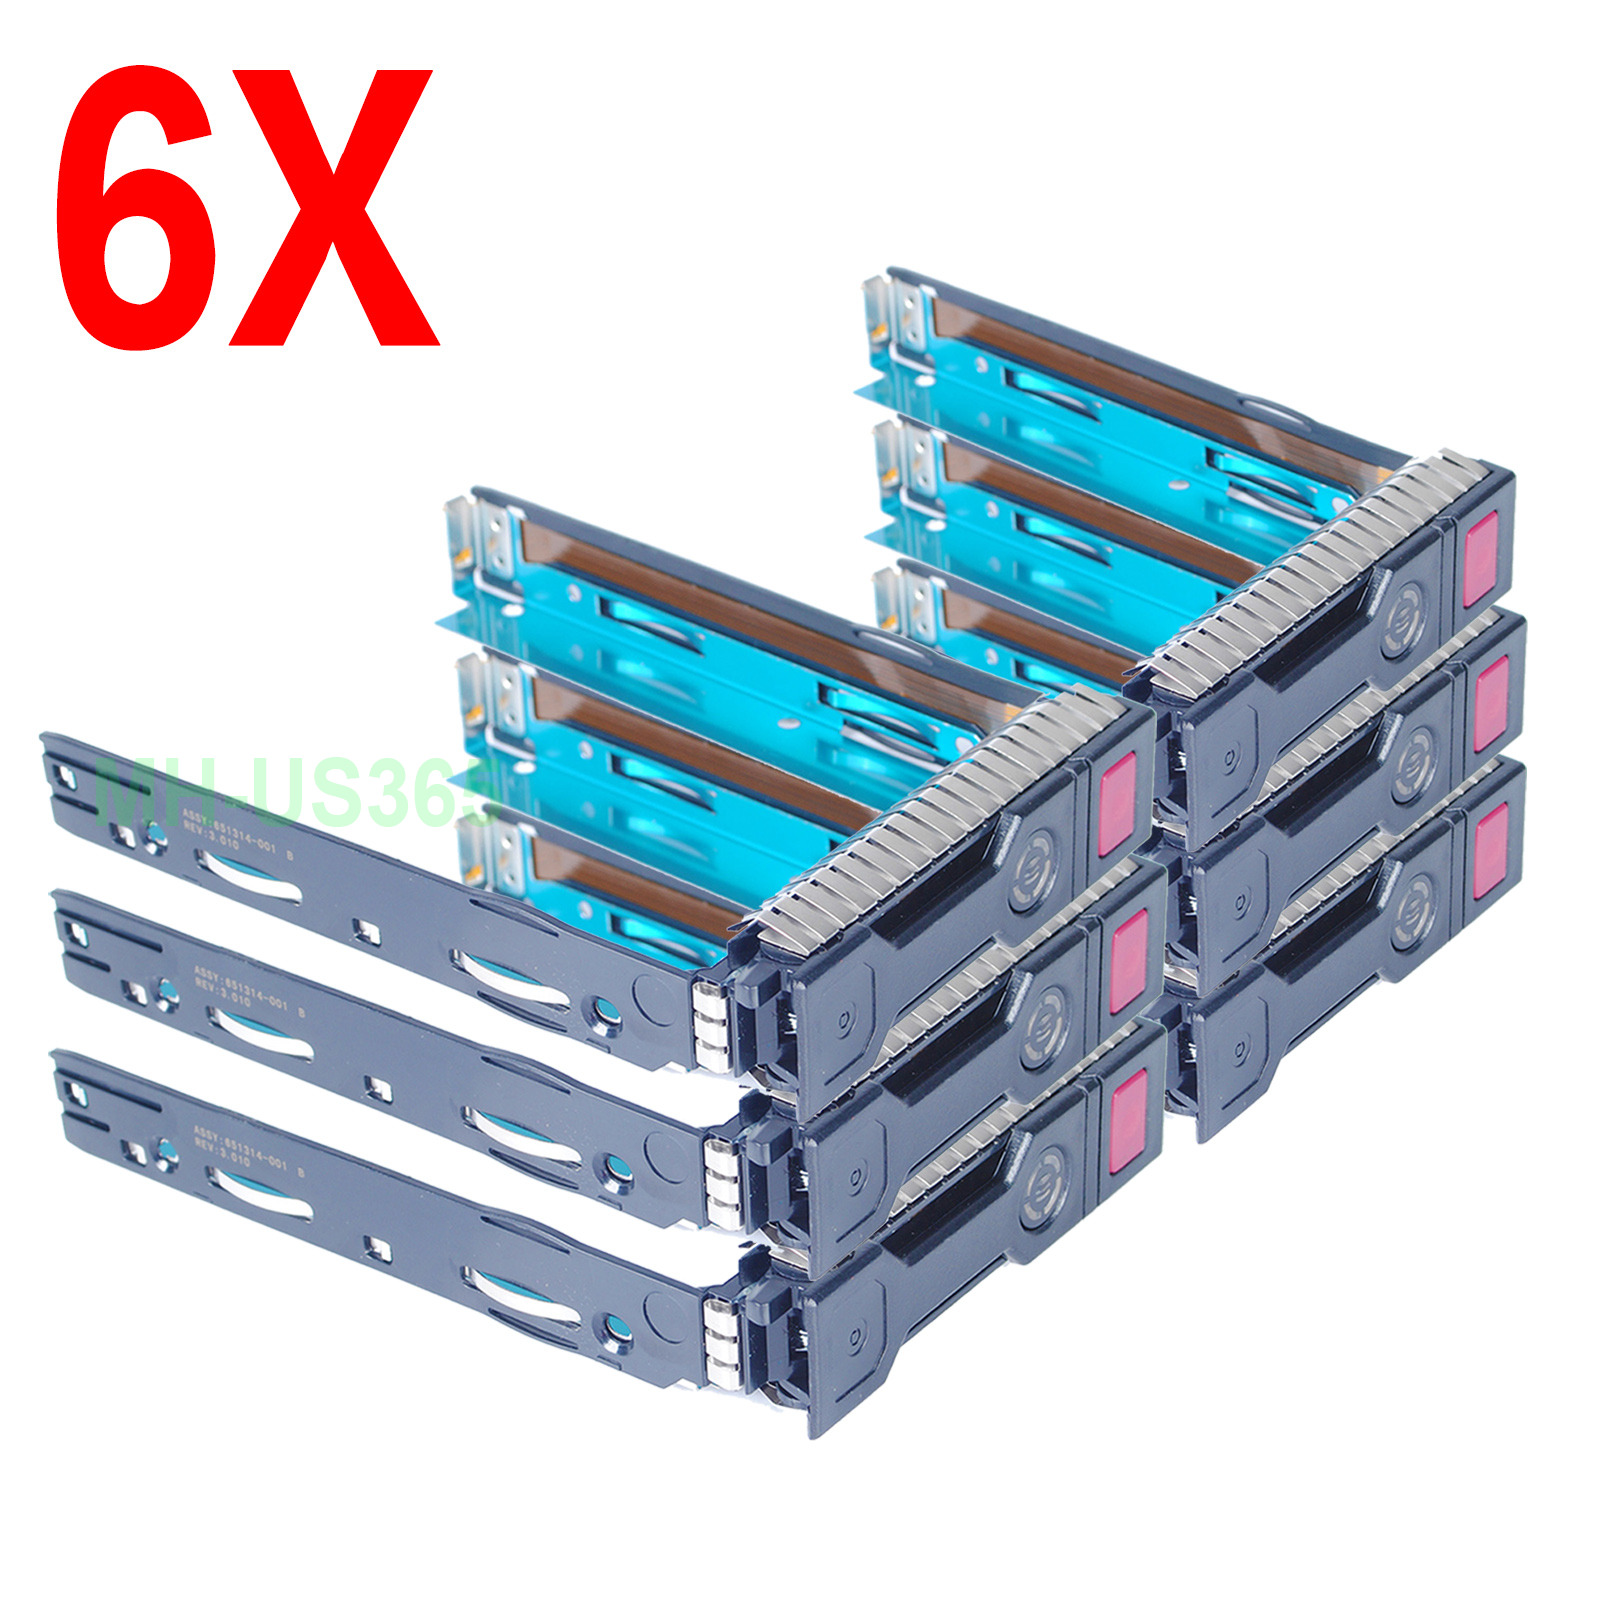 For HP G8 Gen8 651314-001 3.5" SAS SATA HDD Tray Caddy 651320-001 DL380p G8 Chip